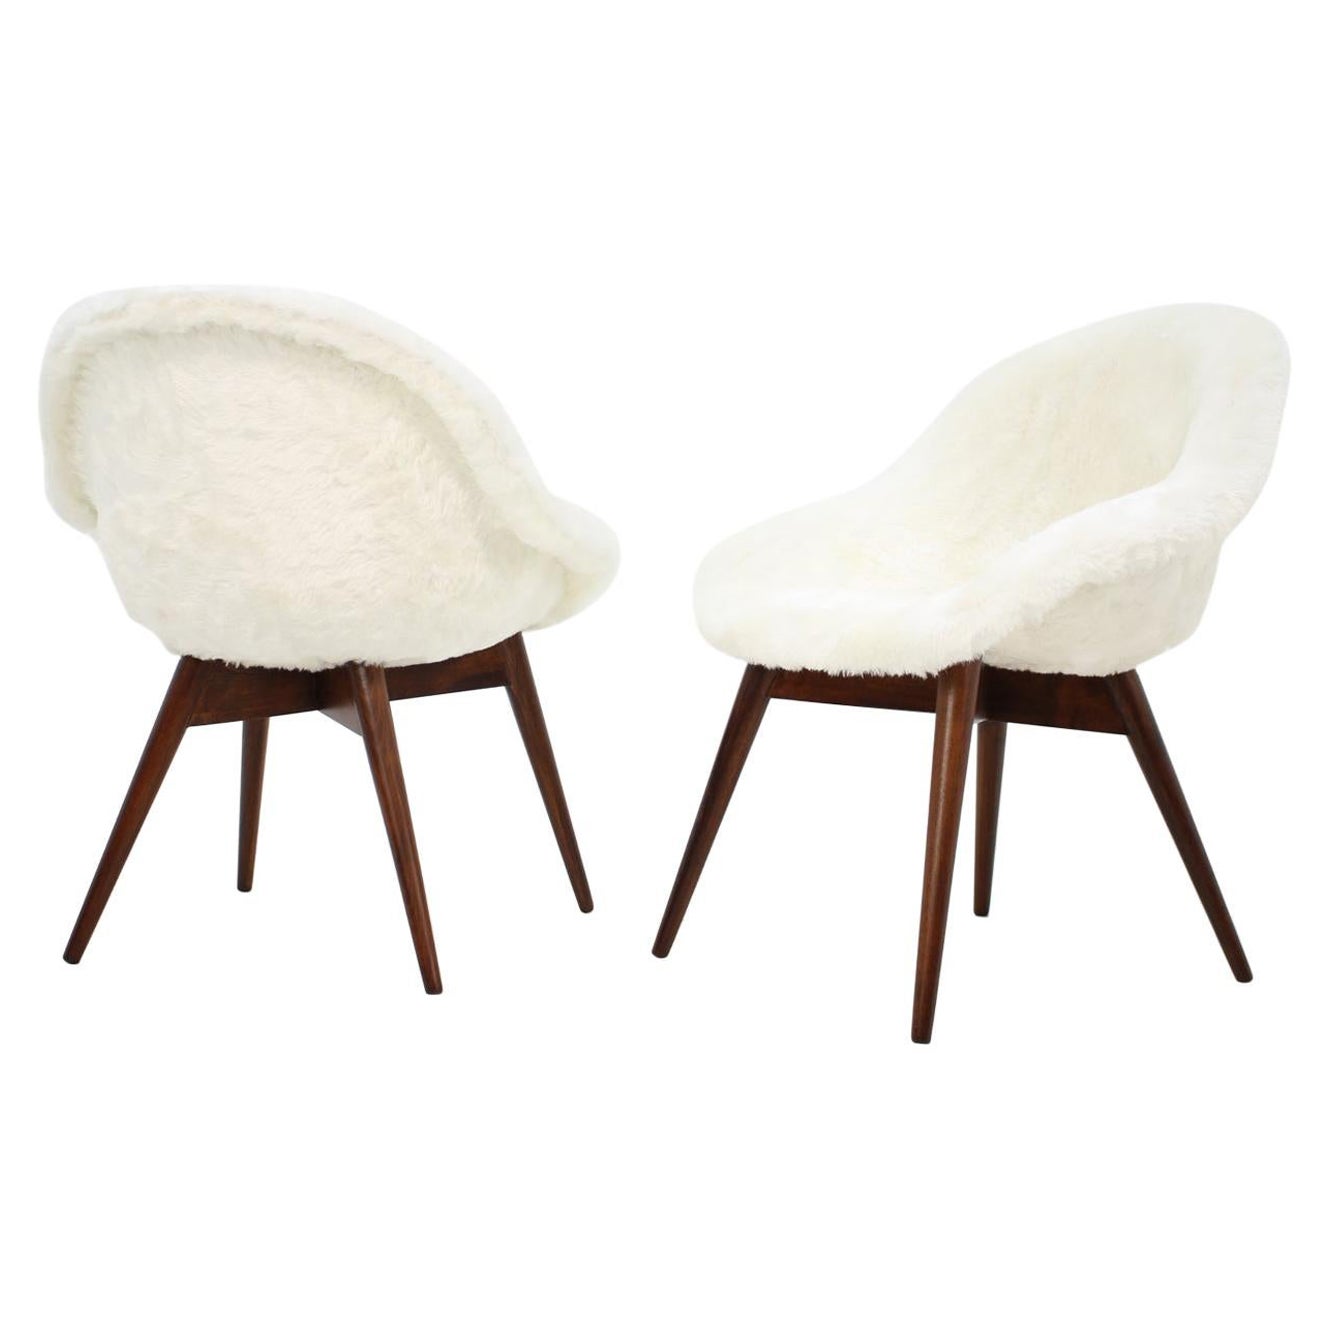 Pair of Two Lounge Chairs by Miroslav Navratil, 1960s